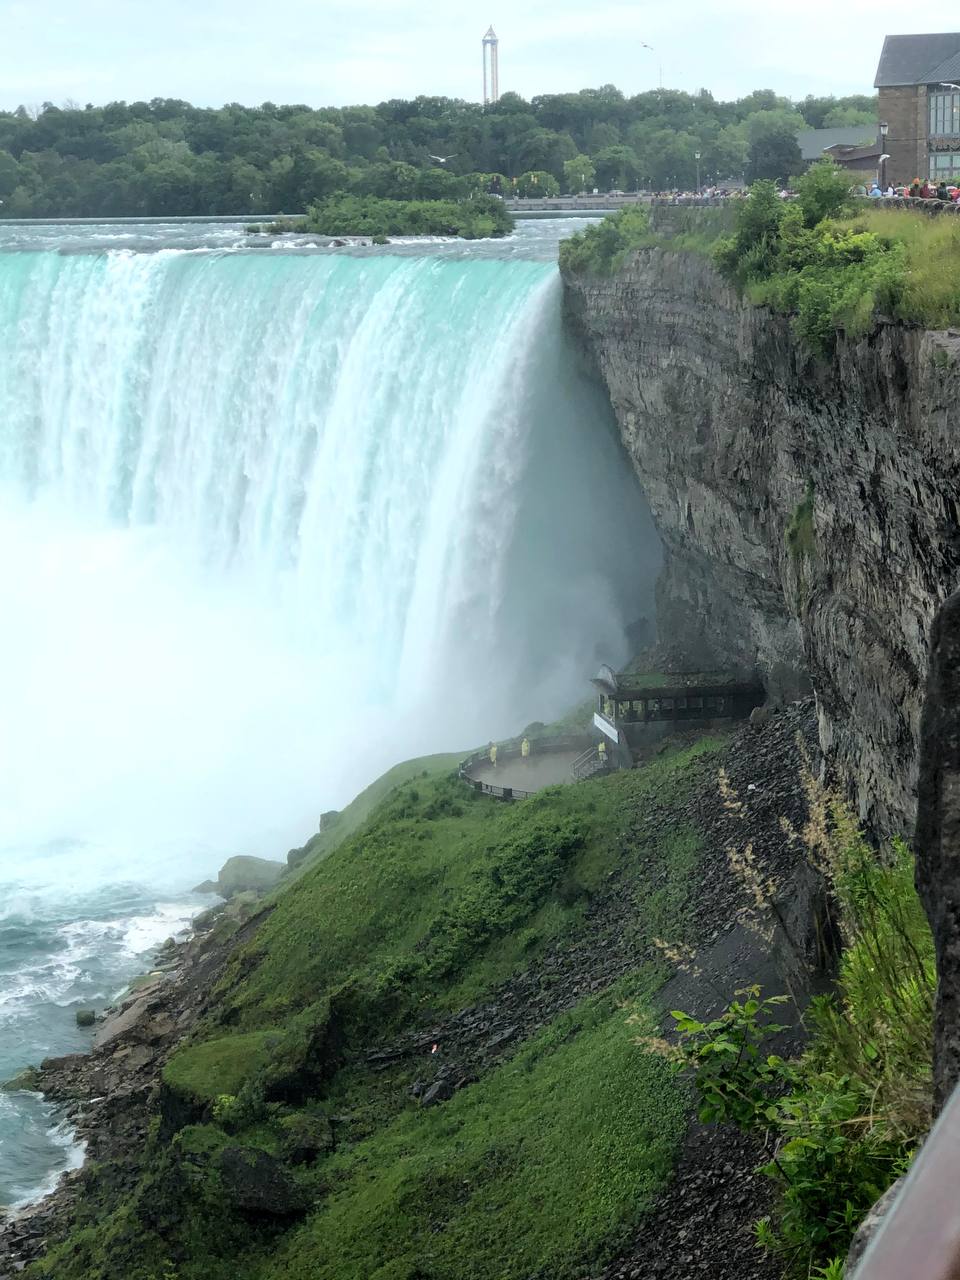 Day Trip to Niagara Falls and wineries